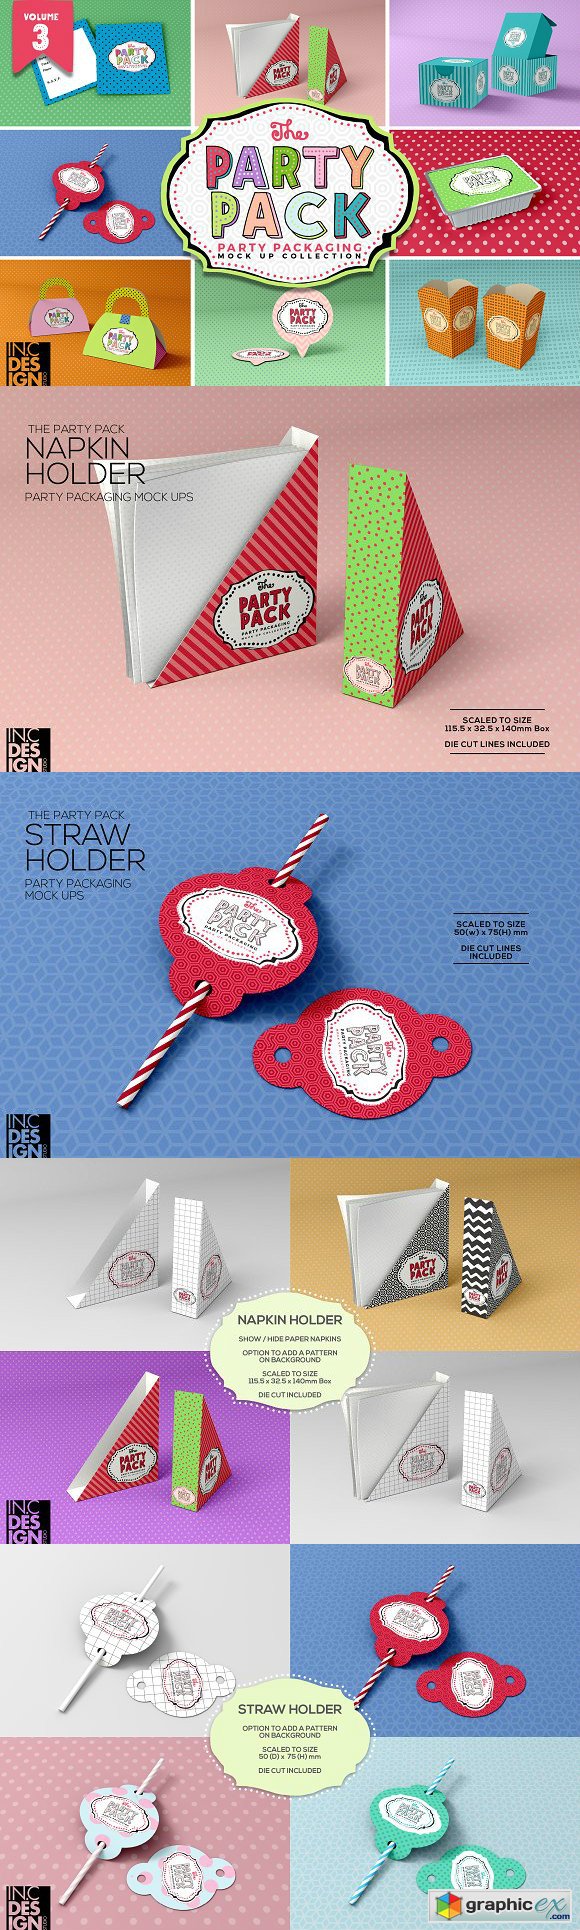 Vol.3 Party Packaging MockUps